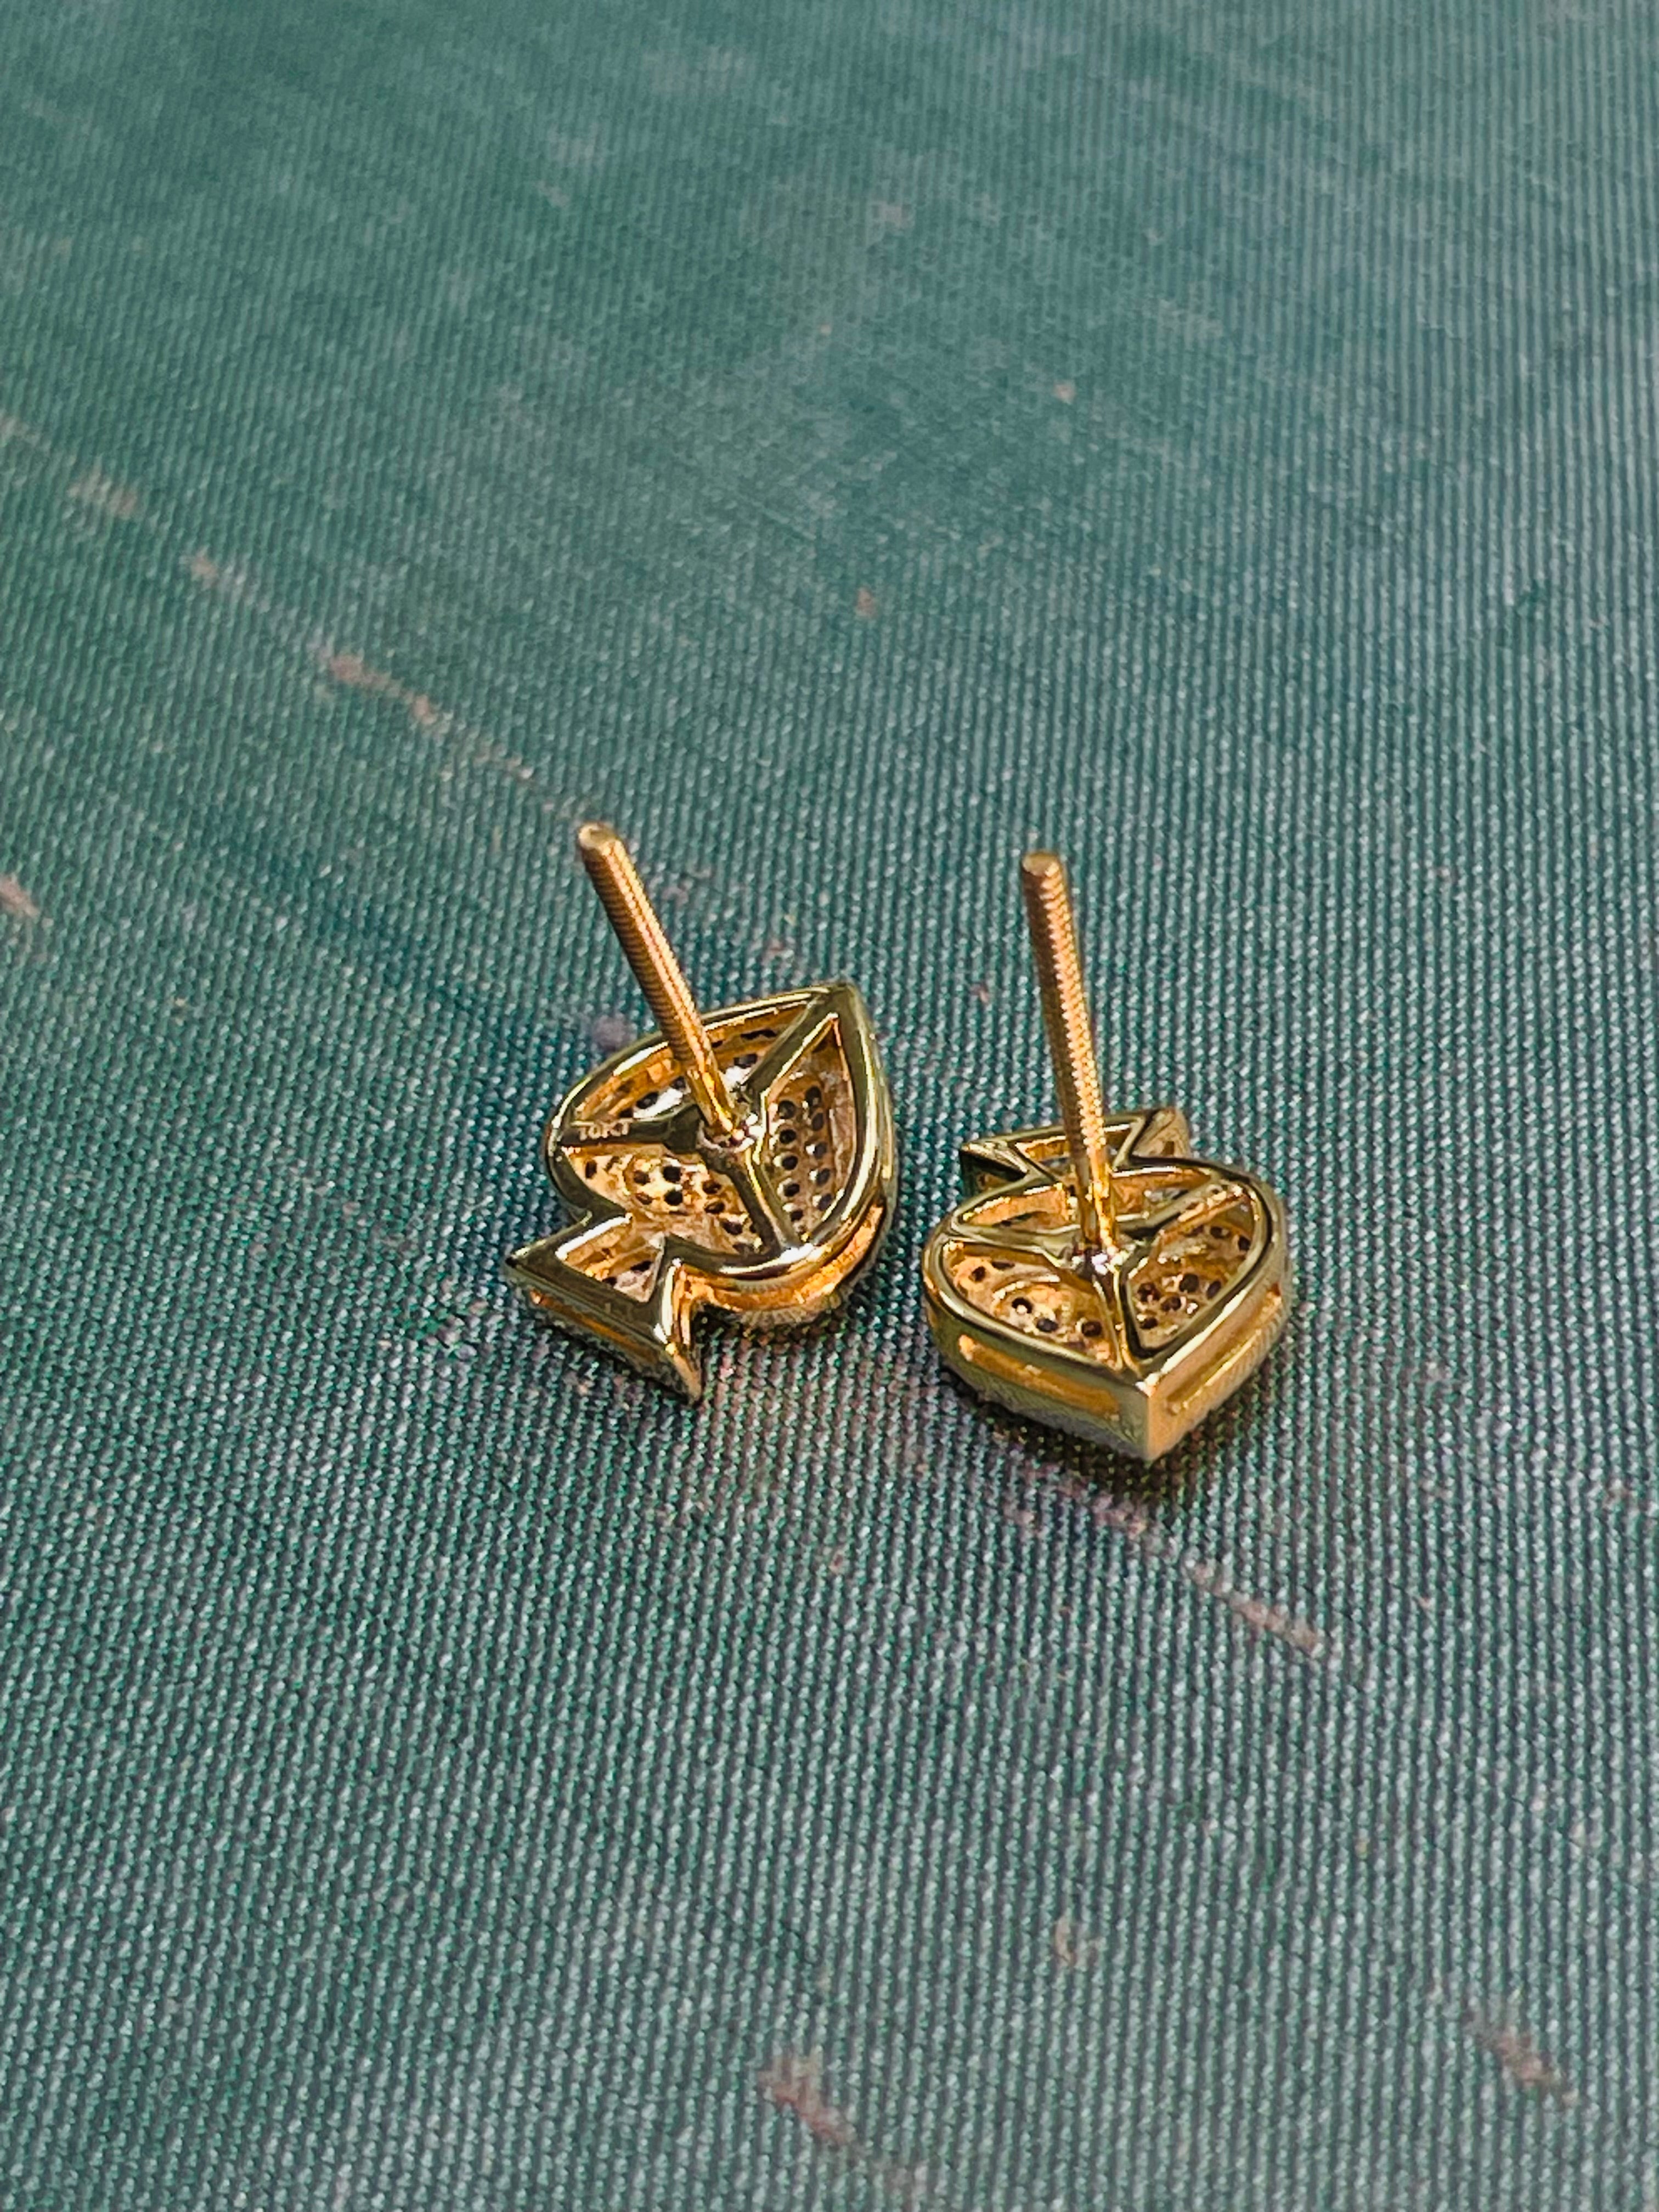 Natural Diamond Pave Spade Earrings in Solid 10K Gold